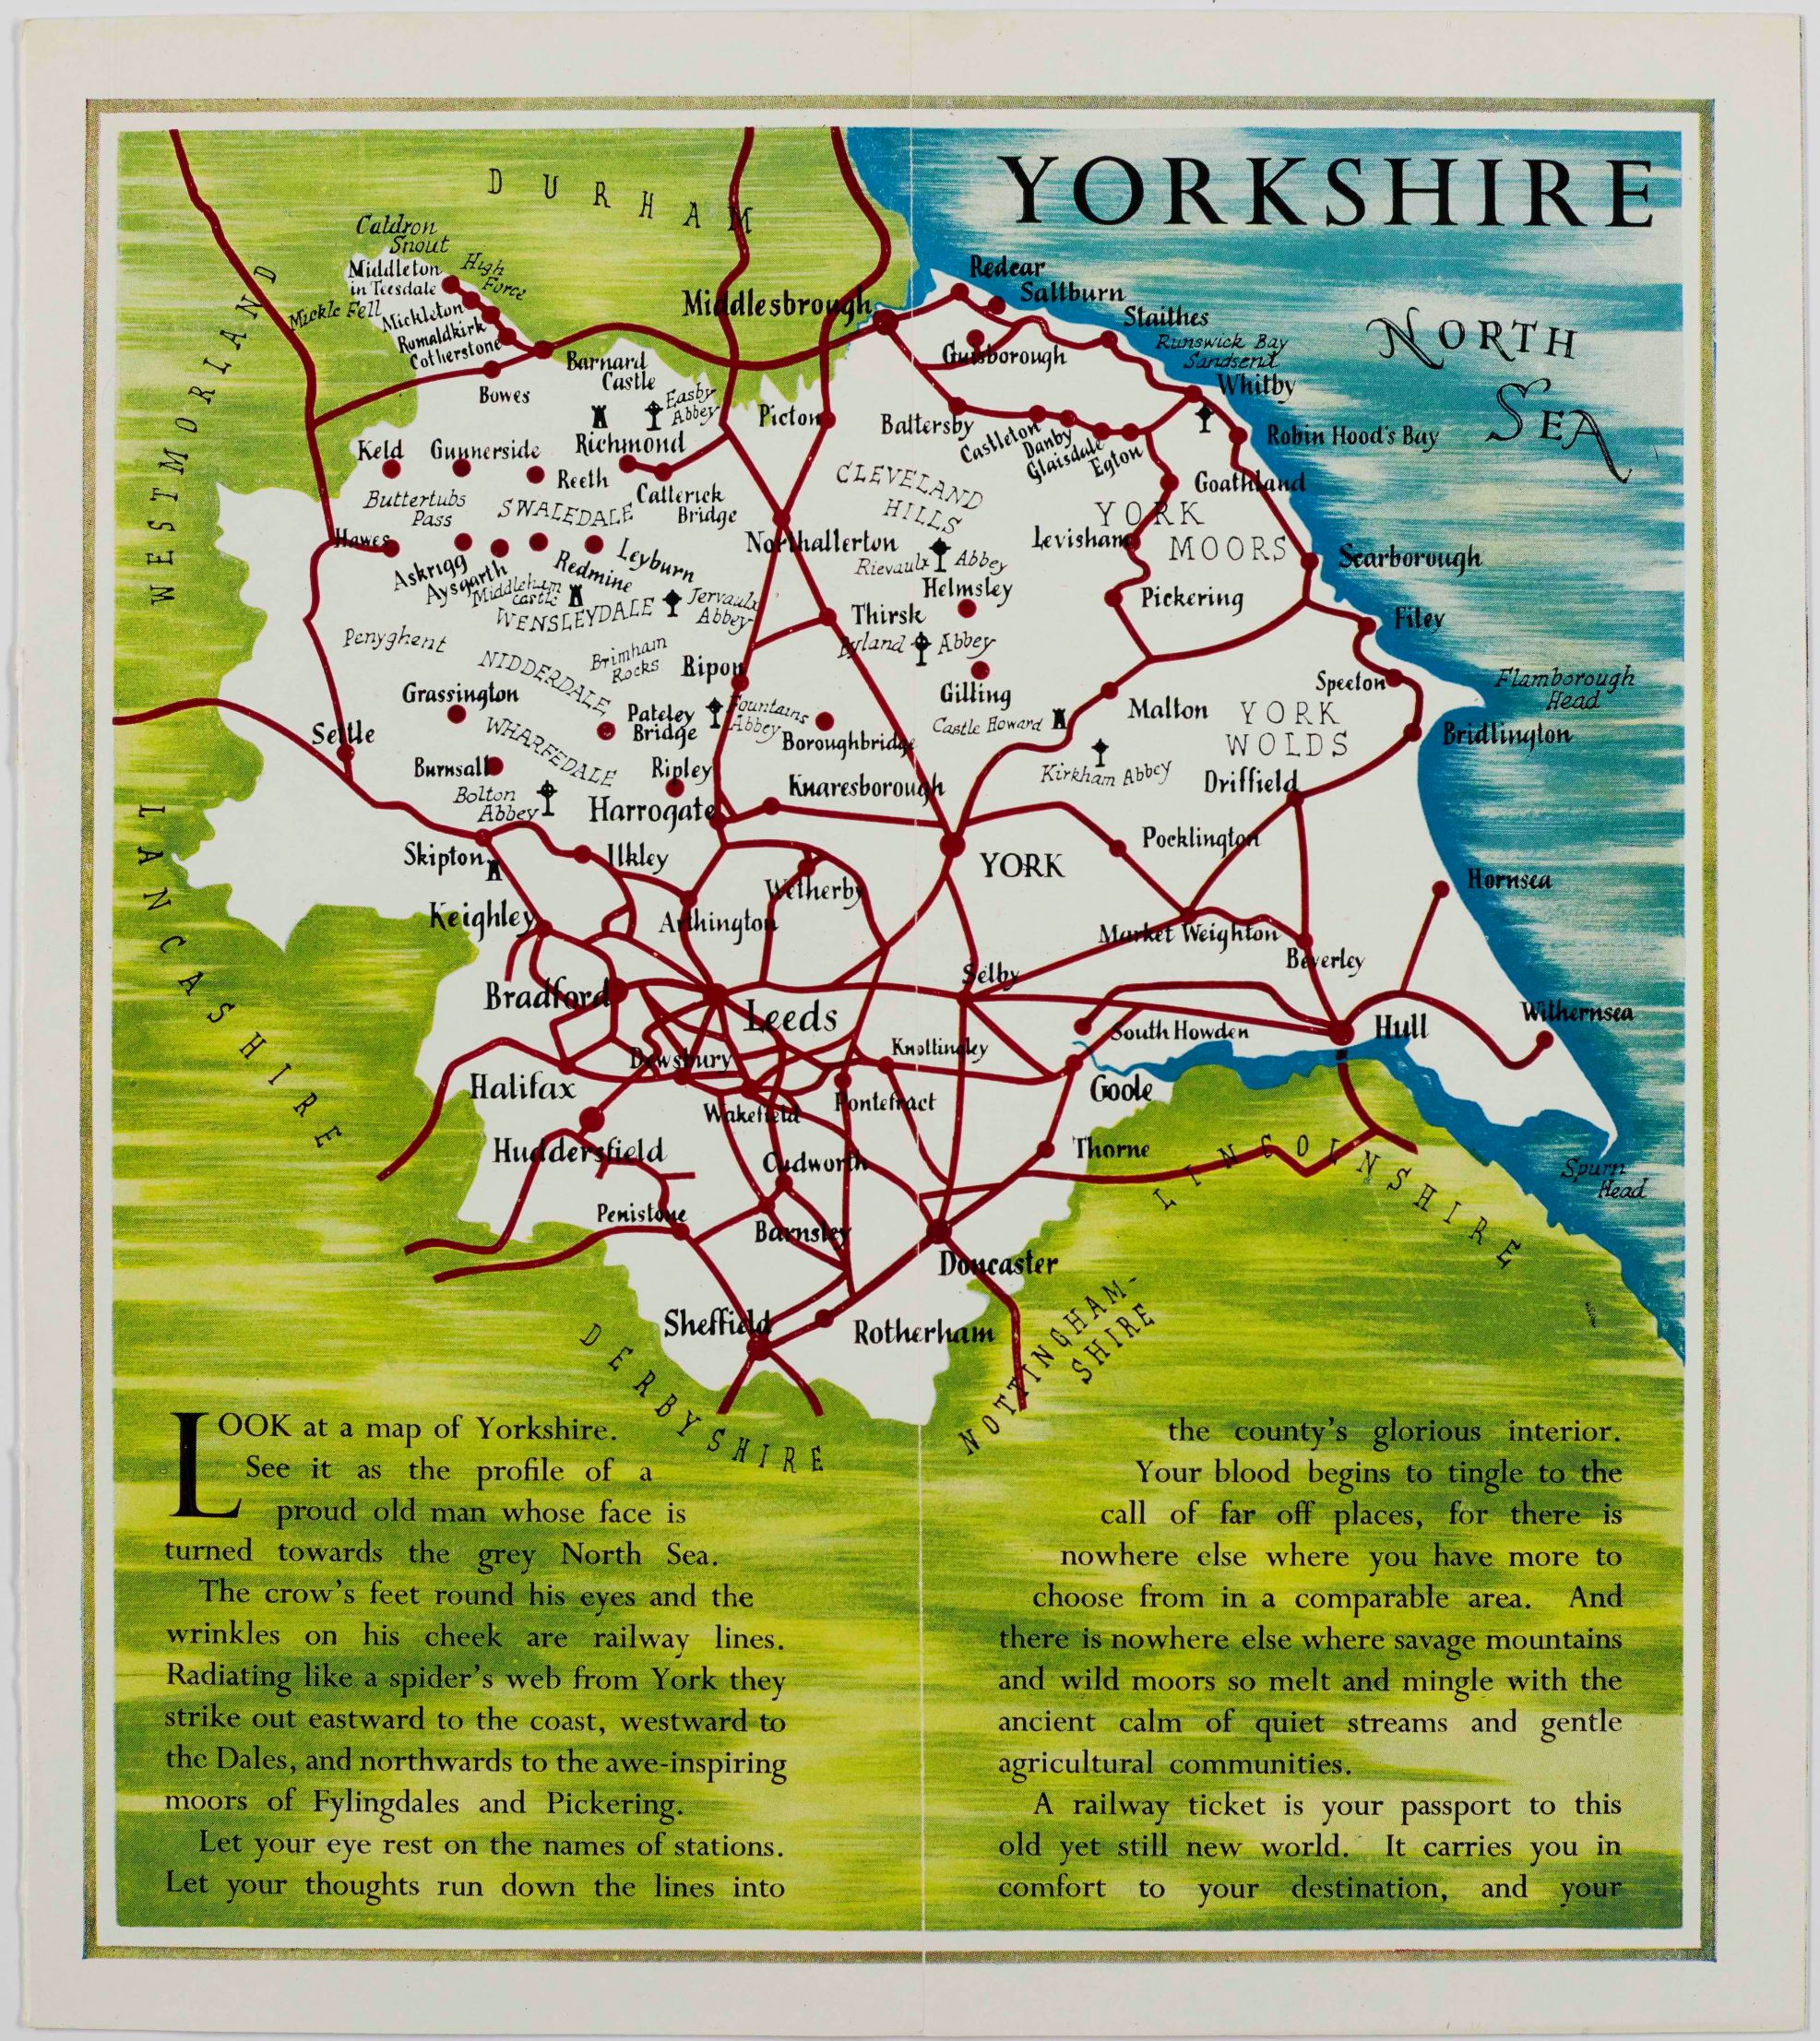 A British Railways Brochure for Yorkshire (from the 20th century)